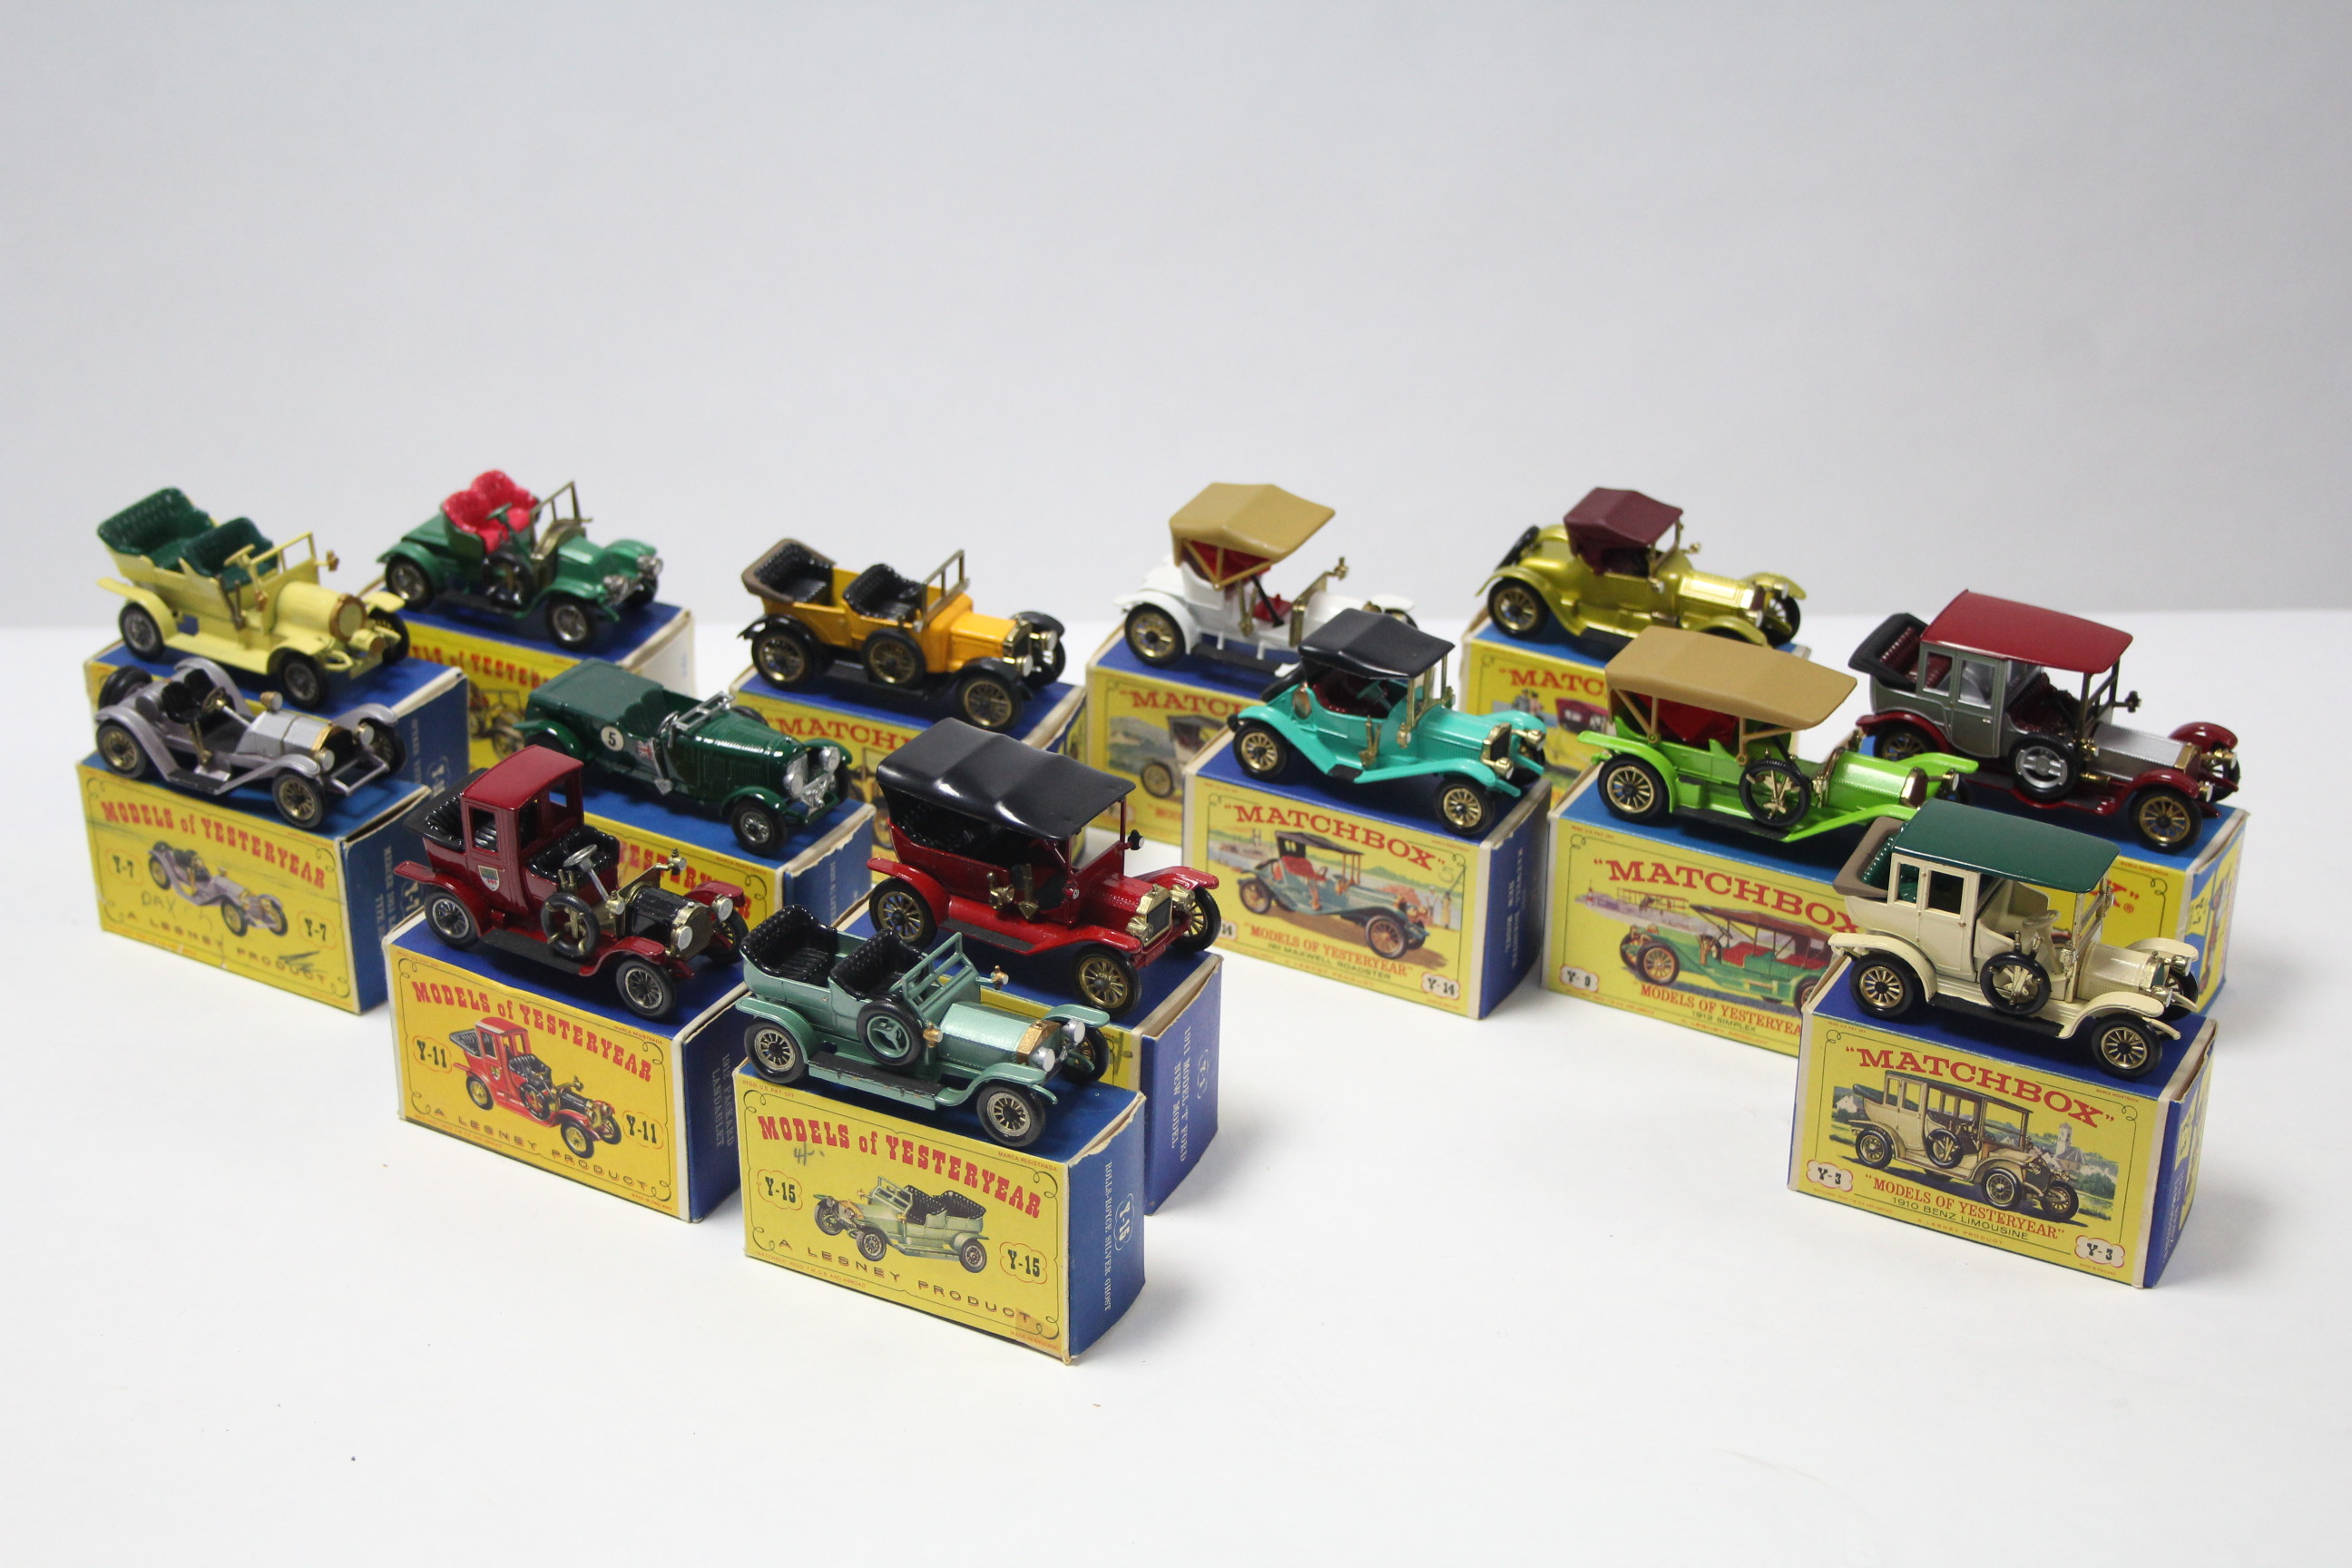 Fourteen Lesney Matchbox Models of Yesteryear scale model cars, all boxed.